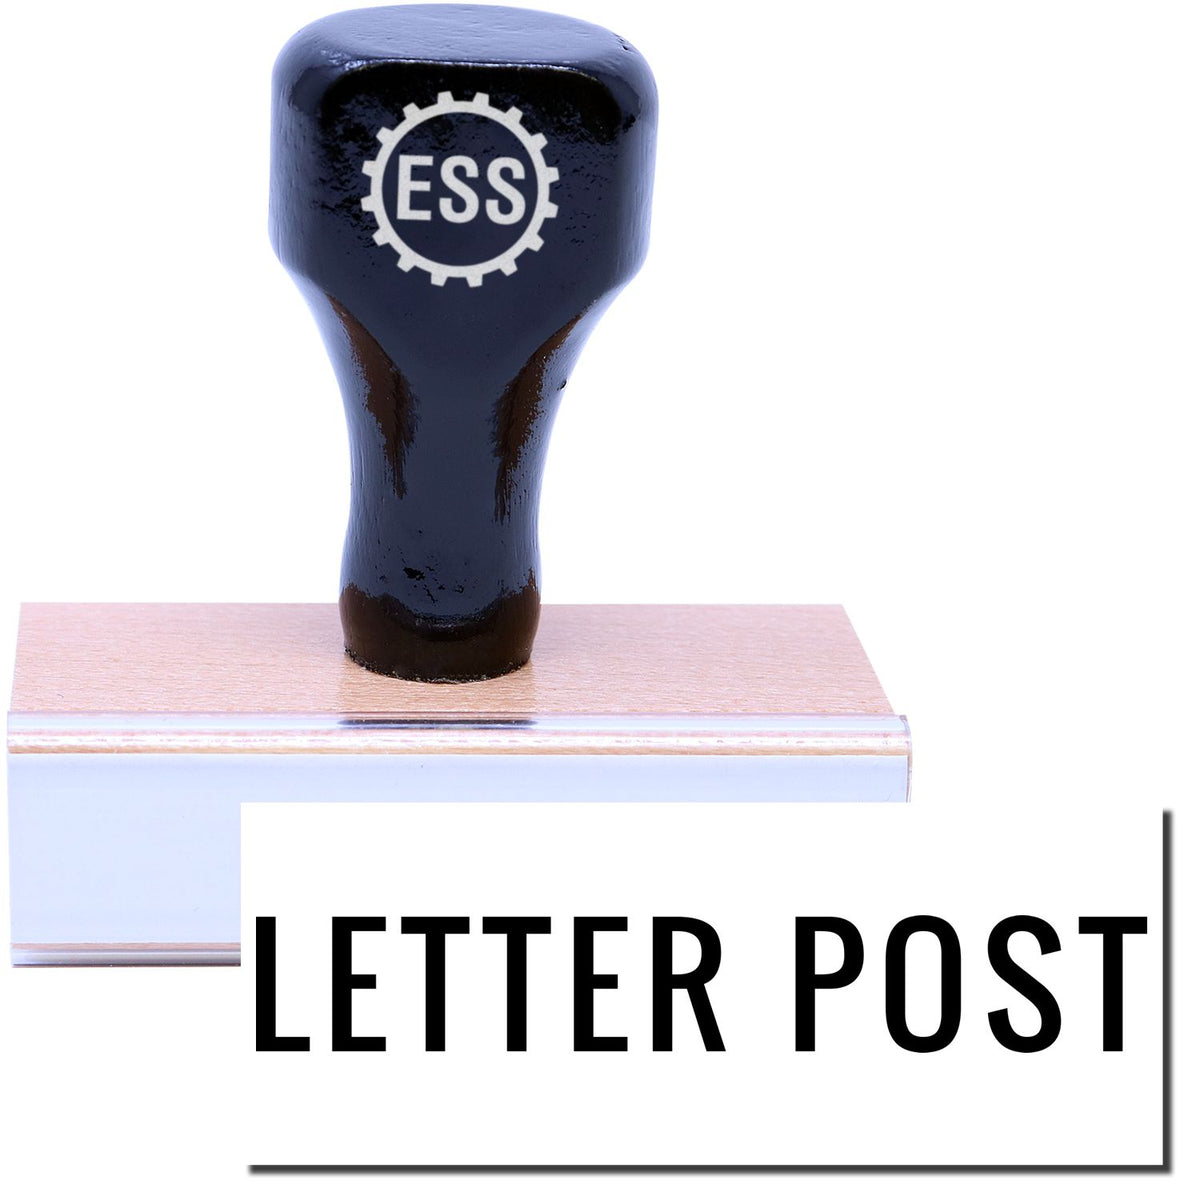 A stock office rubber stamp with a stamped image showing how the text &quot;LETTER POST&quot; is displayed after stamping.